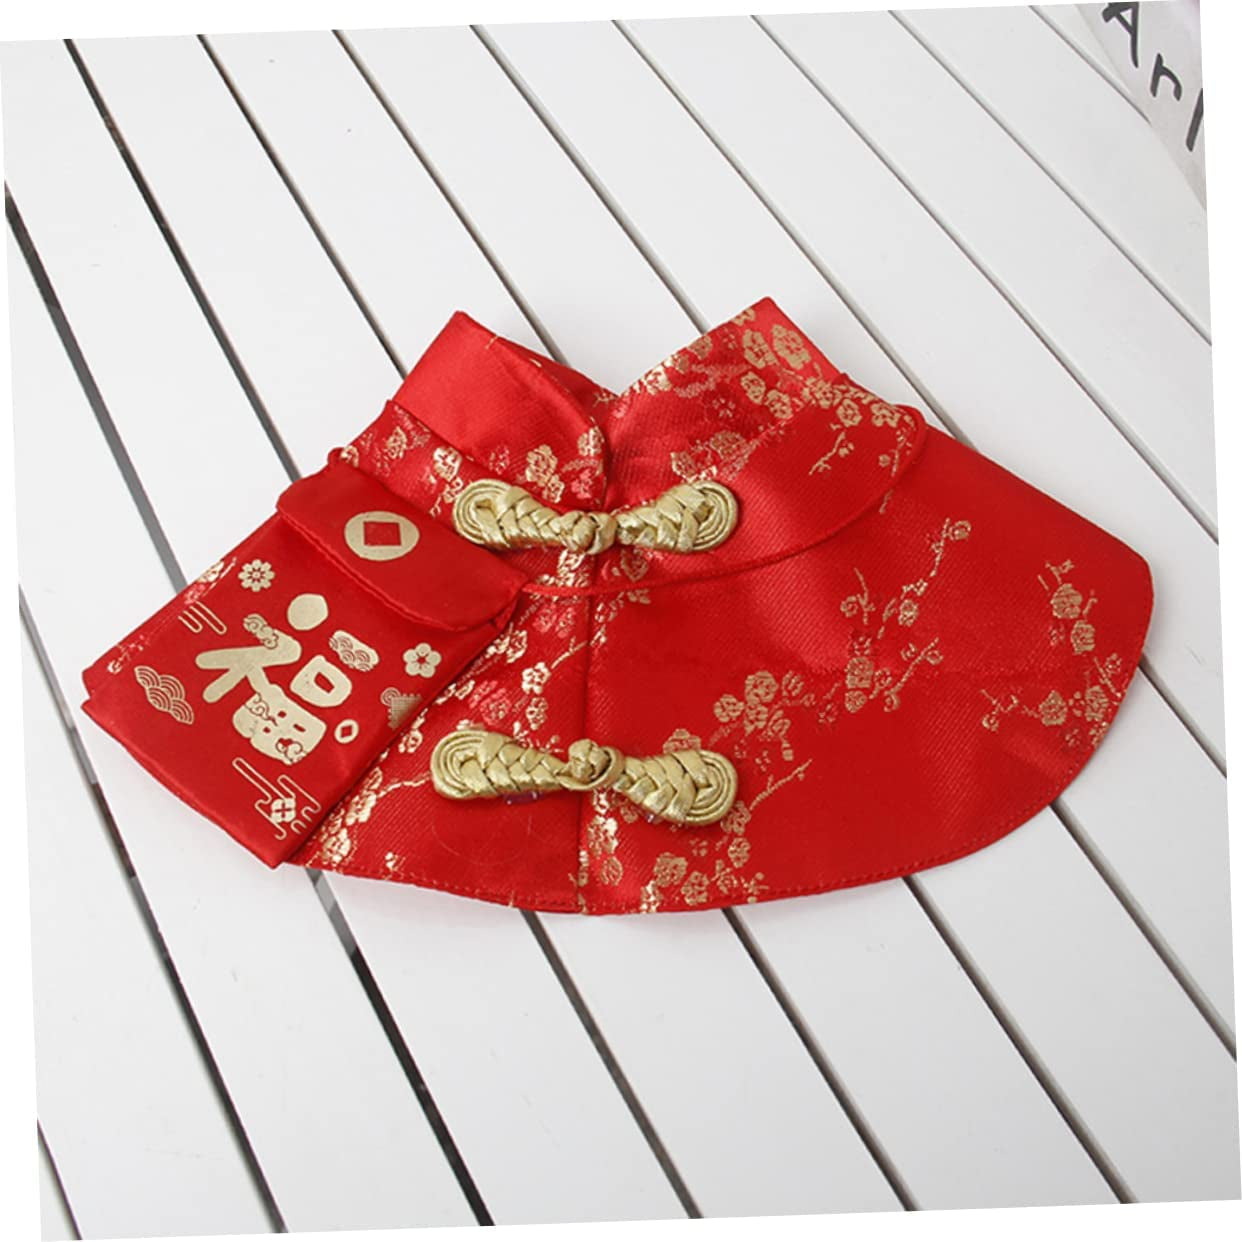 Balacoo 1Pc Joyous Year Clothes Dogs Envelope Coat L New Cosplay Dress Size Style Cloak Comfortable Costume Cape Decorative Pets Dynasty Chinese Small Delicate Red Pet up Cat Dog Animals & Pet Supplies > Pet Supplies > Dog Supplies > Dog Apparel Balacoo   